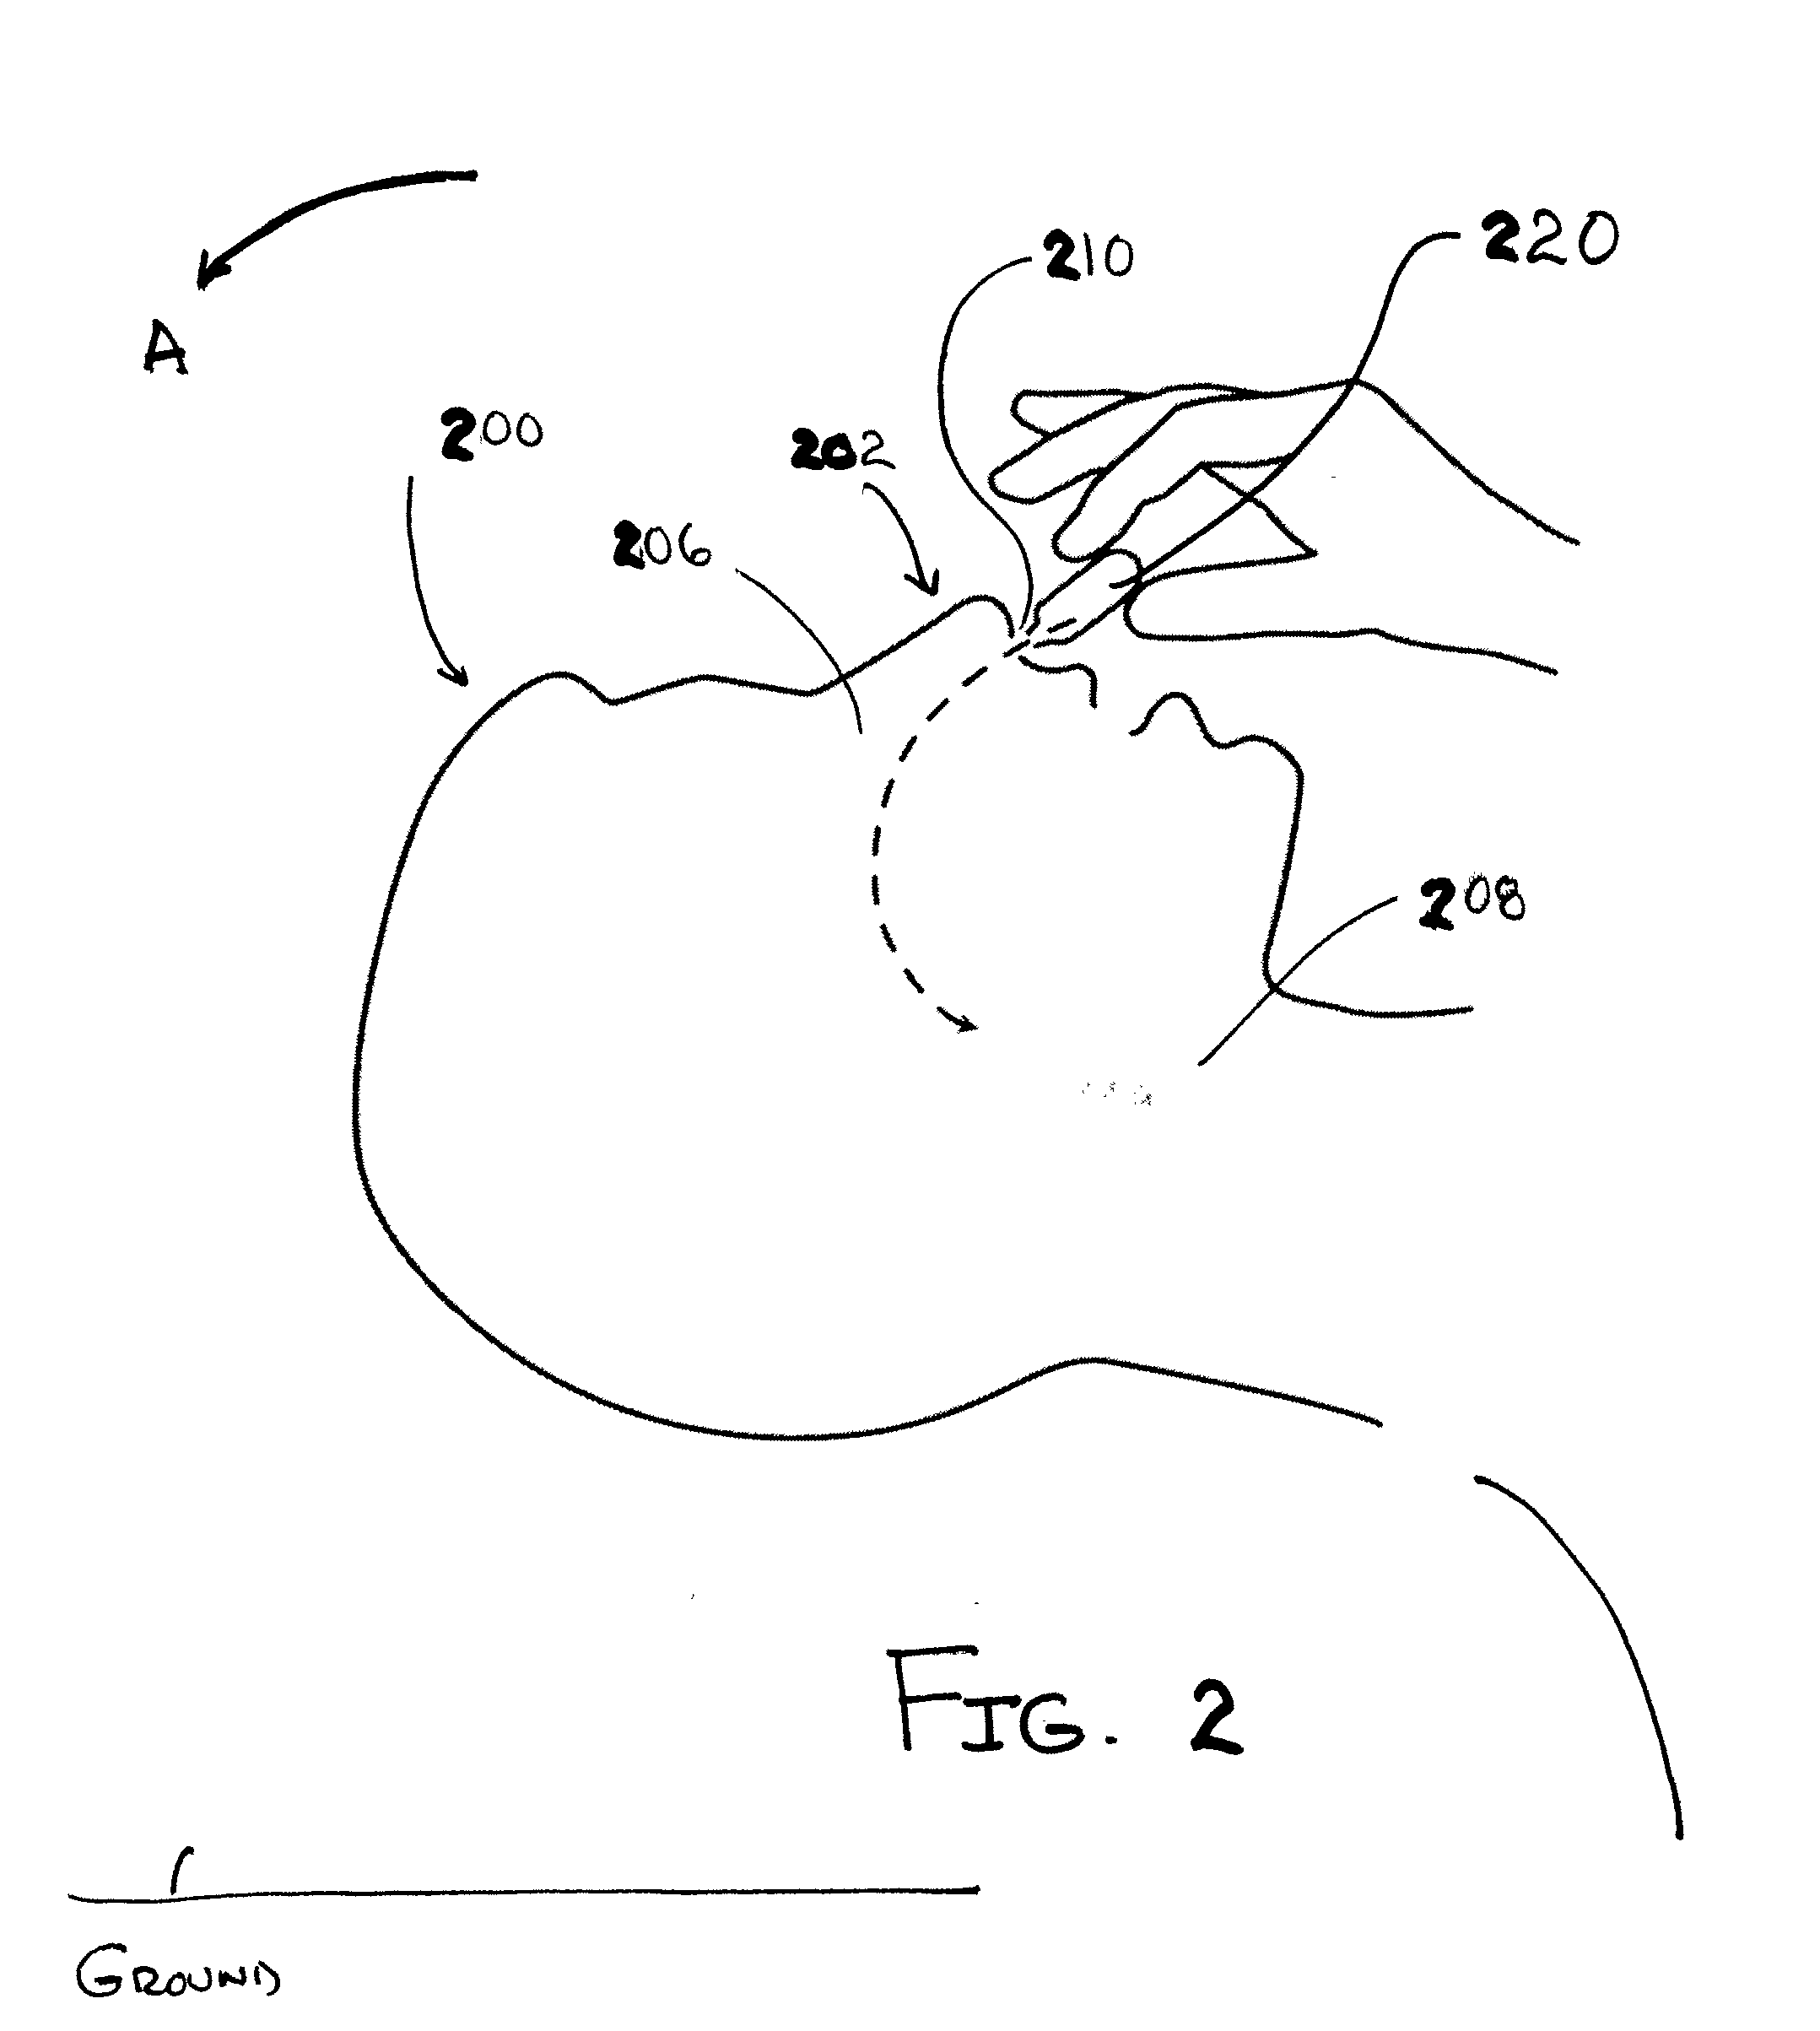 Method of administering a substance to the throat